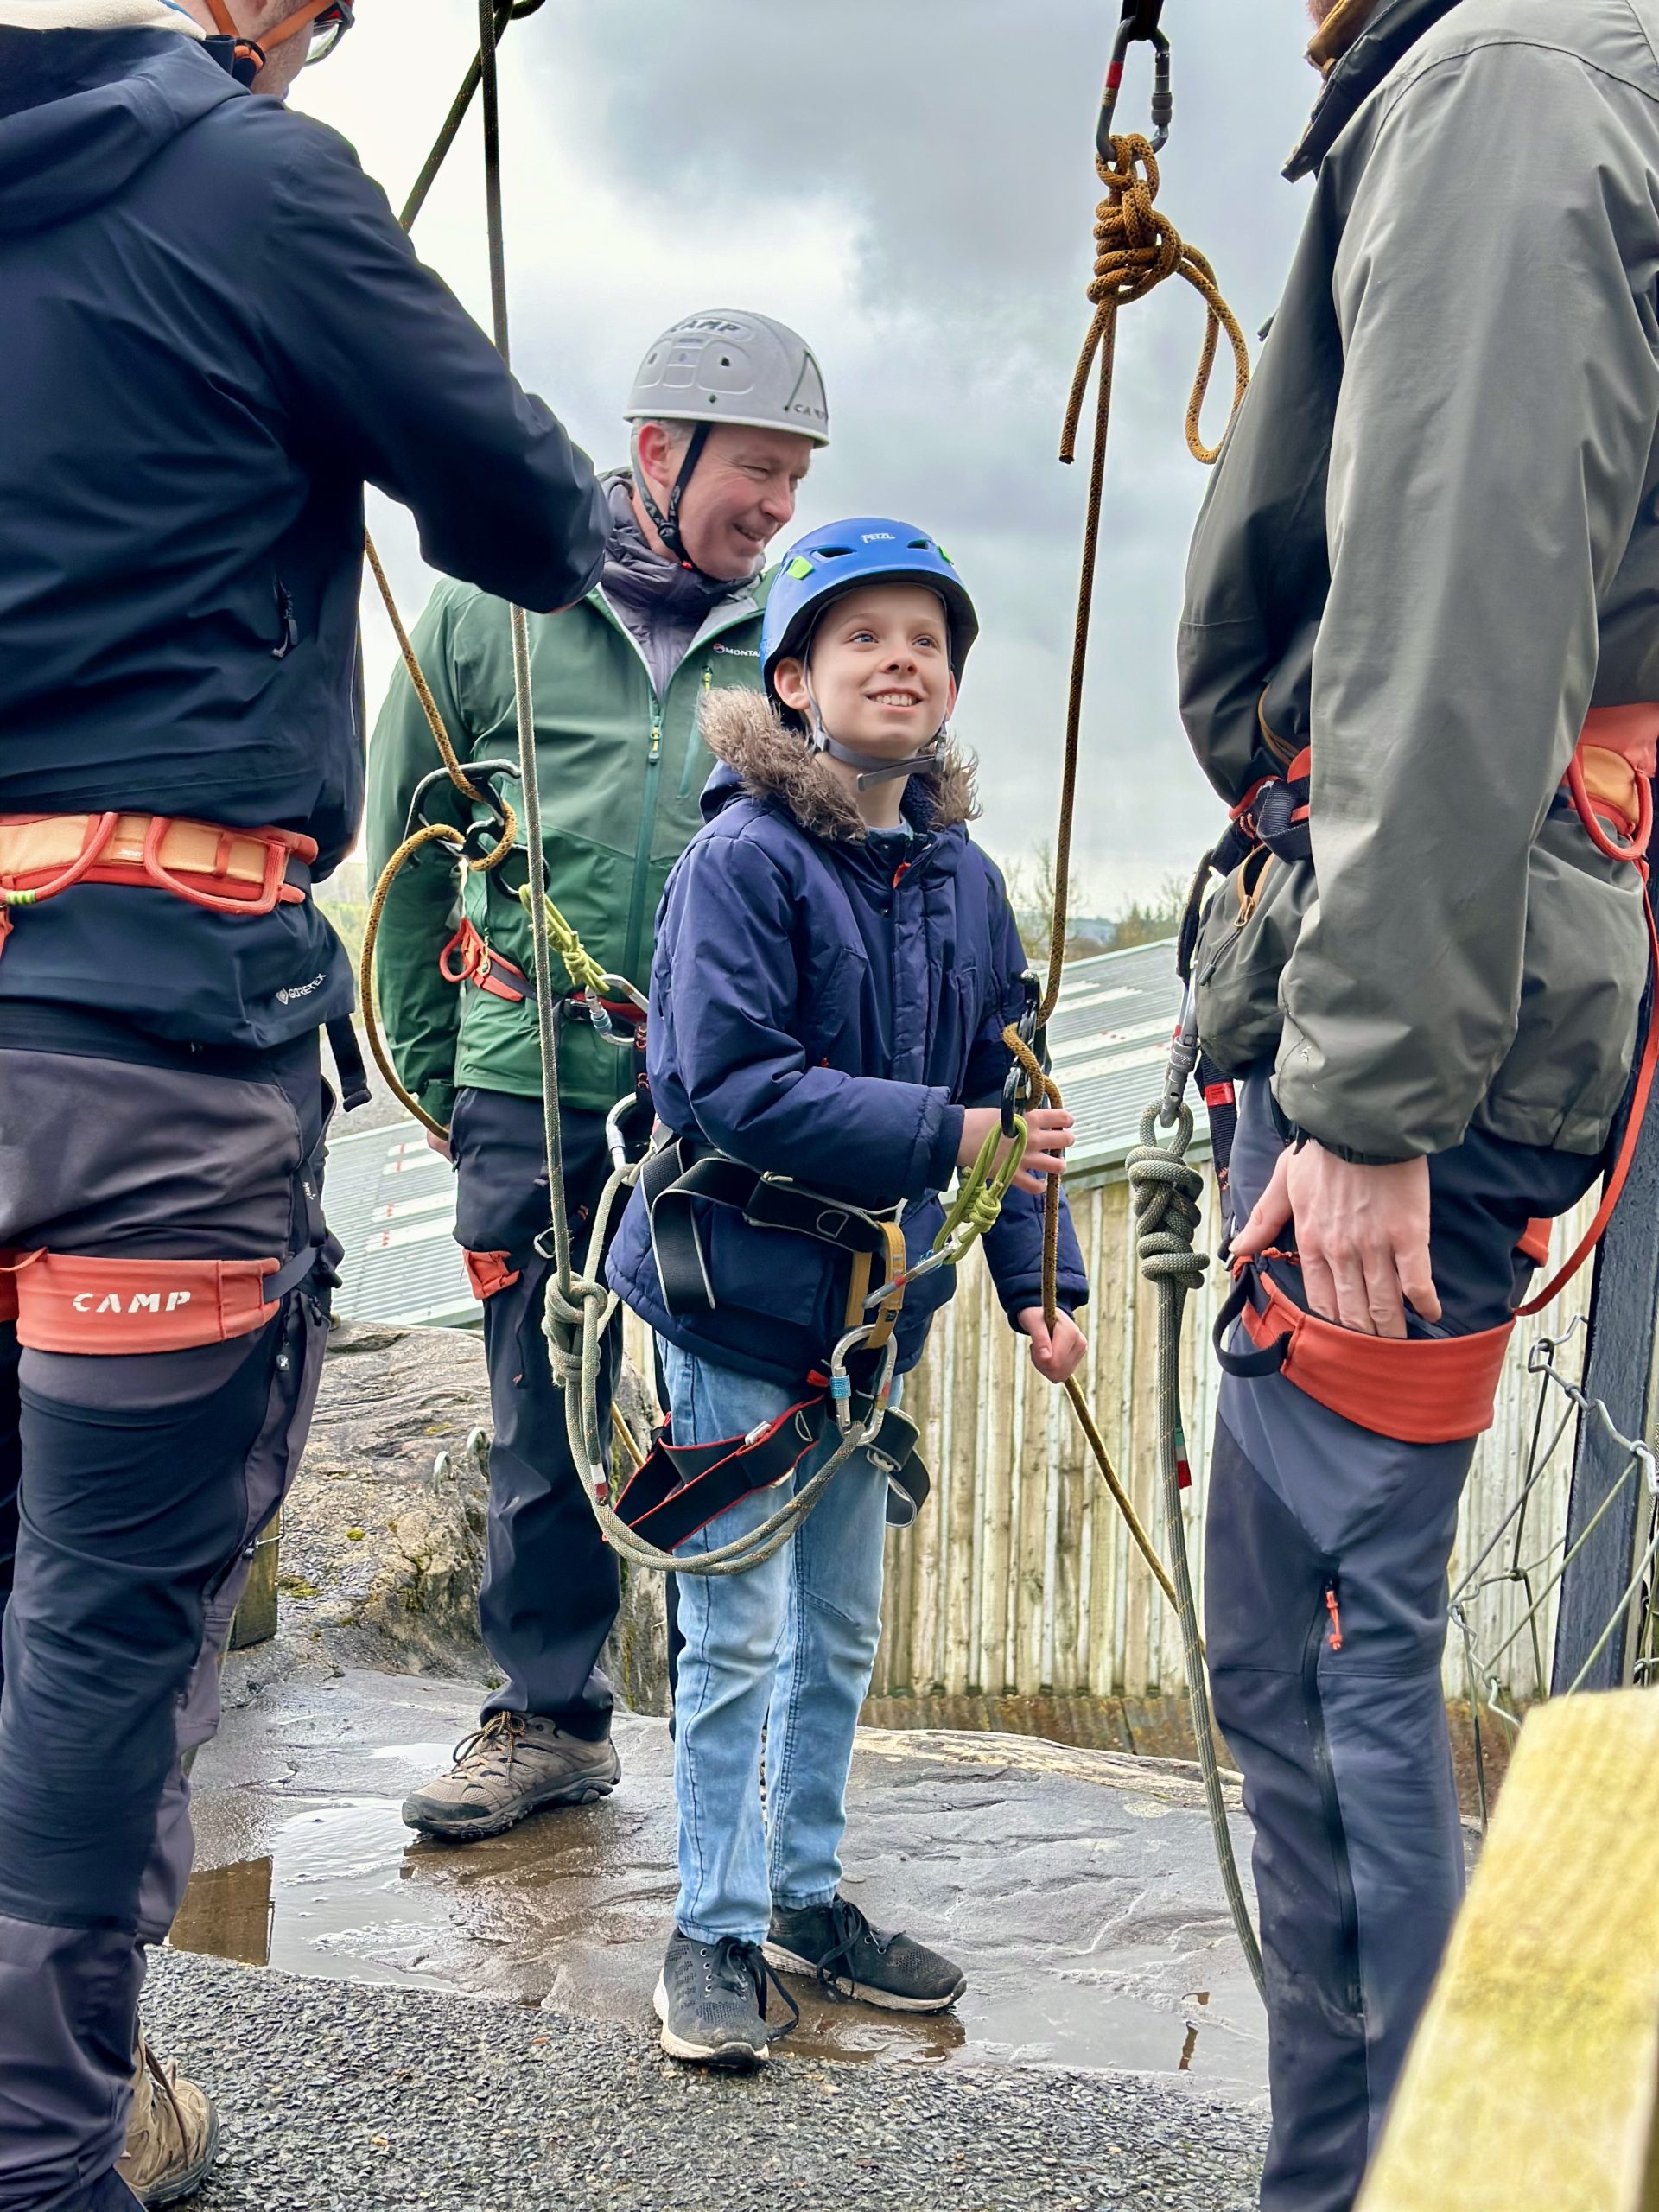 A young boy in a blue coat and a blue helmet is looking upwards and smiling at an adult standing in front of him. He is wearing a harness and has ropes attached to him as well as the person behind him, who is smiling.